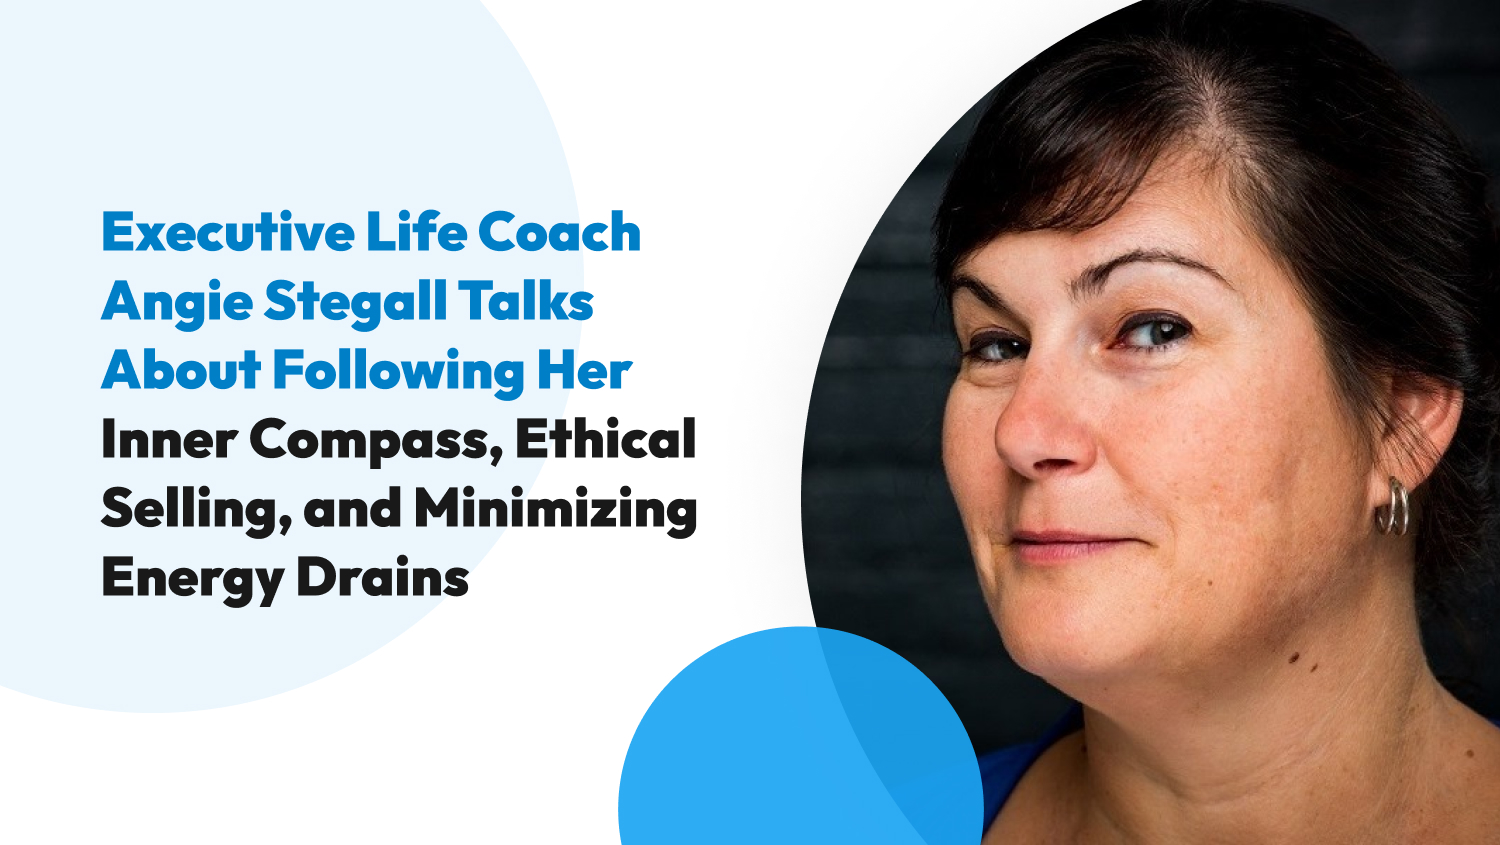 Executive Life Coach Angie Stegall Talks About Following Her Inner Compass, Ethical Selling, and Minimizing Energy Drains